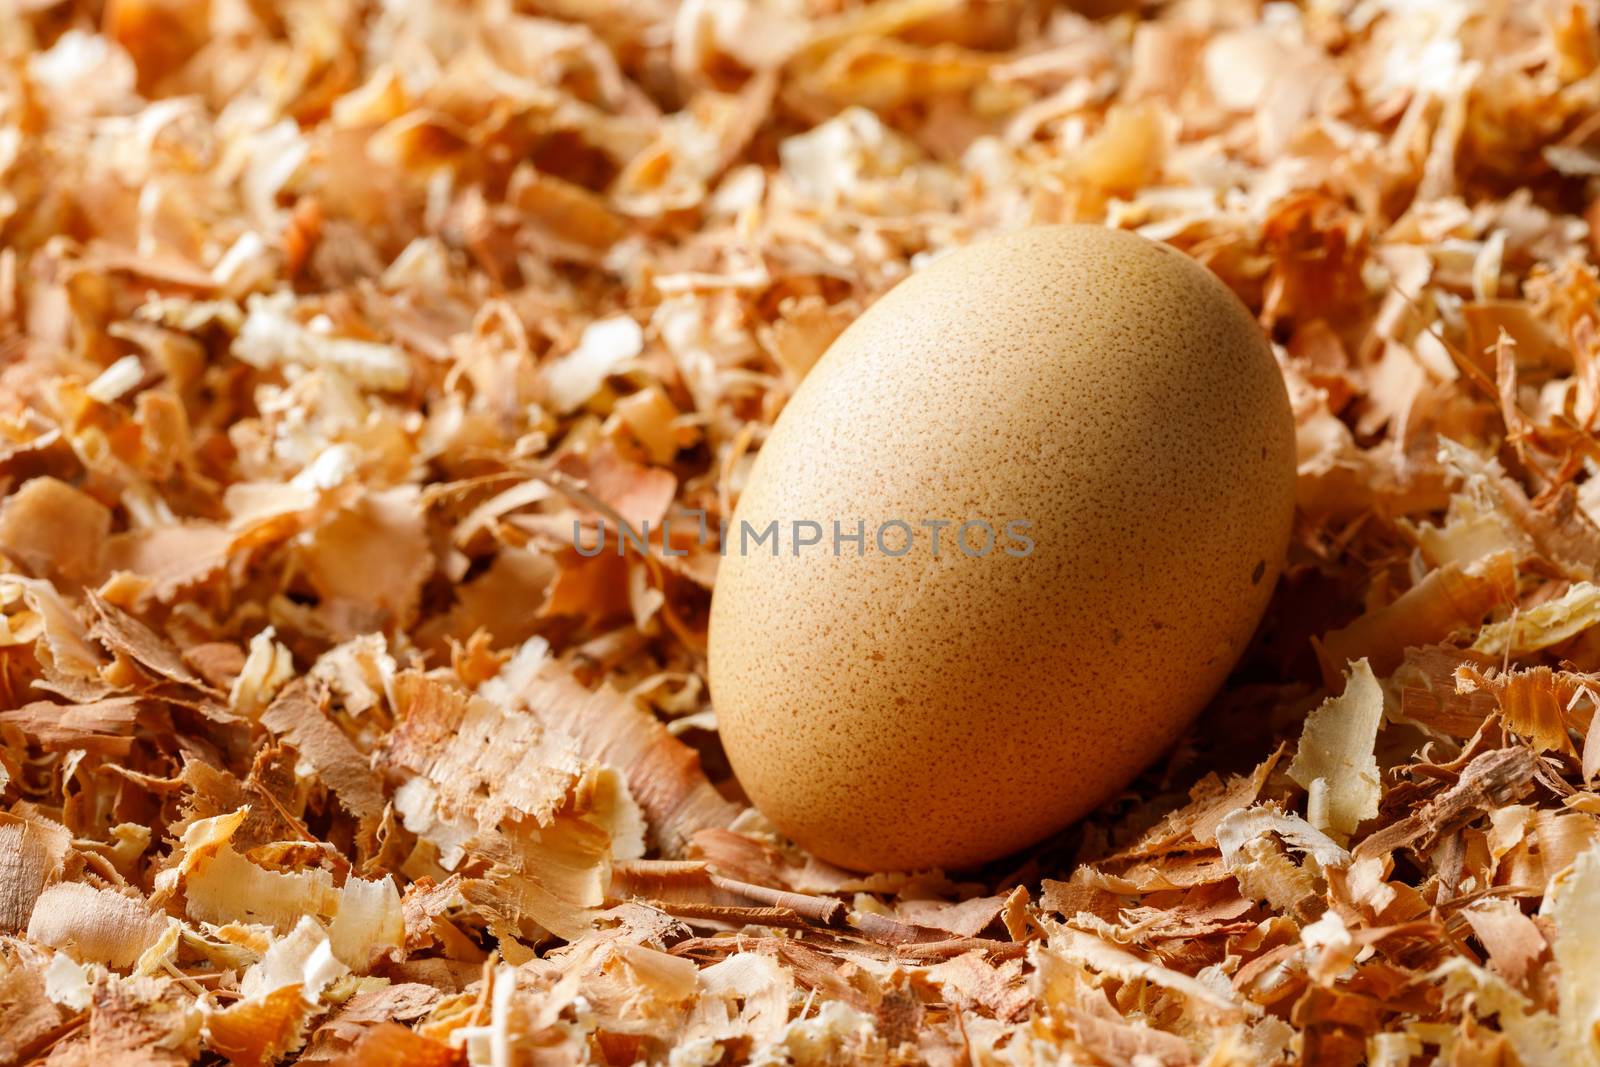 Hen or duck egg on saw dust by smuay